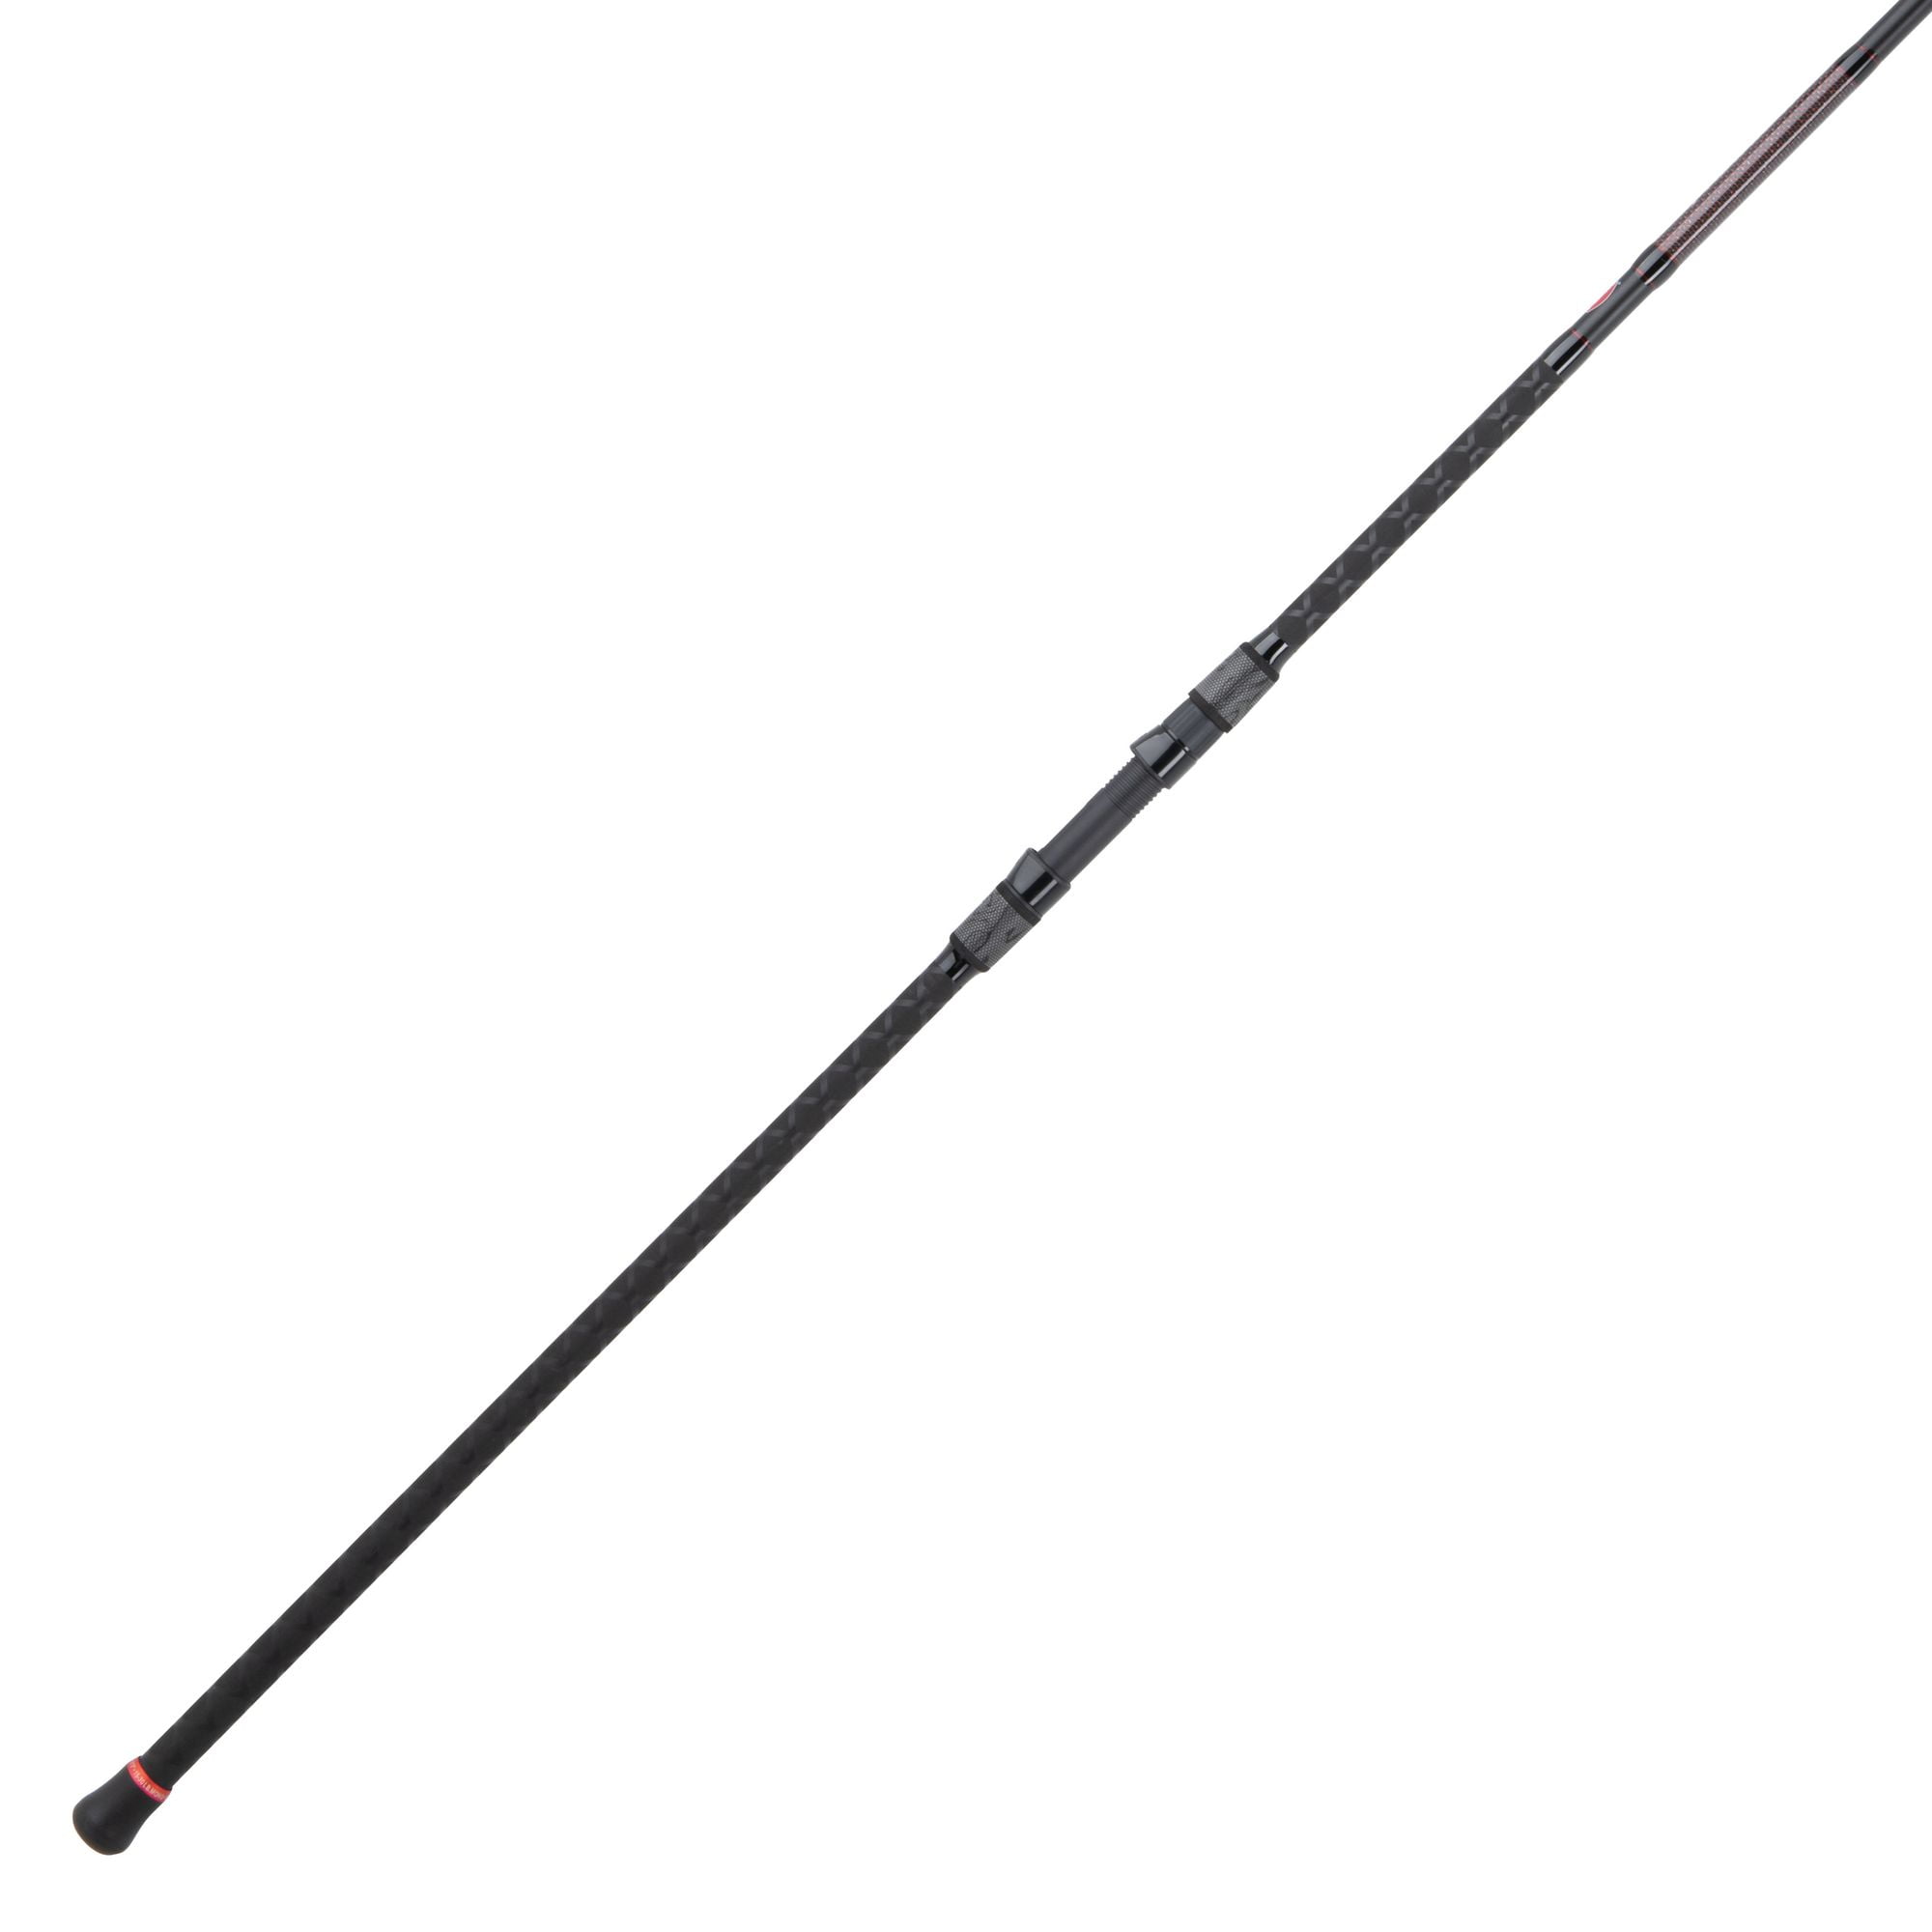 WHOLESALE 10 X 13' BEACH SURF BEACH CASTER FISHING ROD WITH  YOUR OWN LOGO 